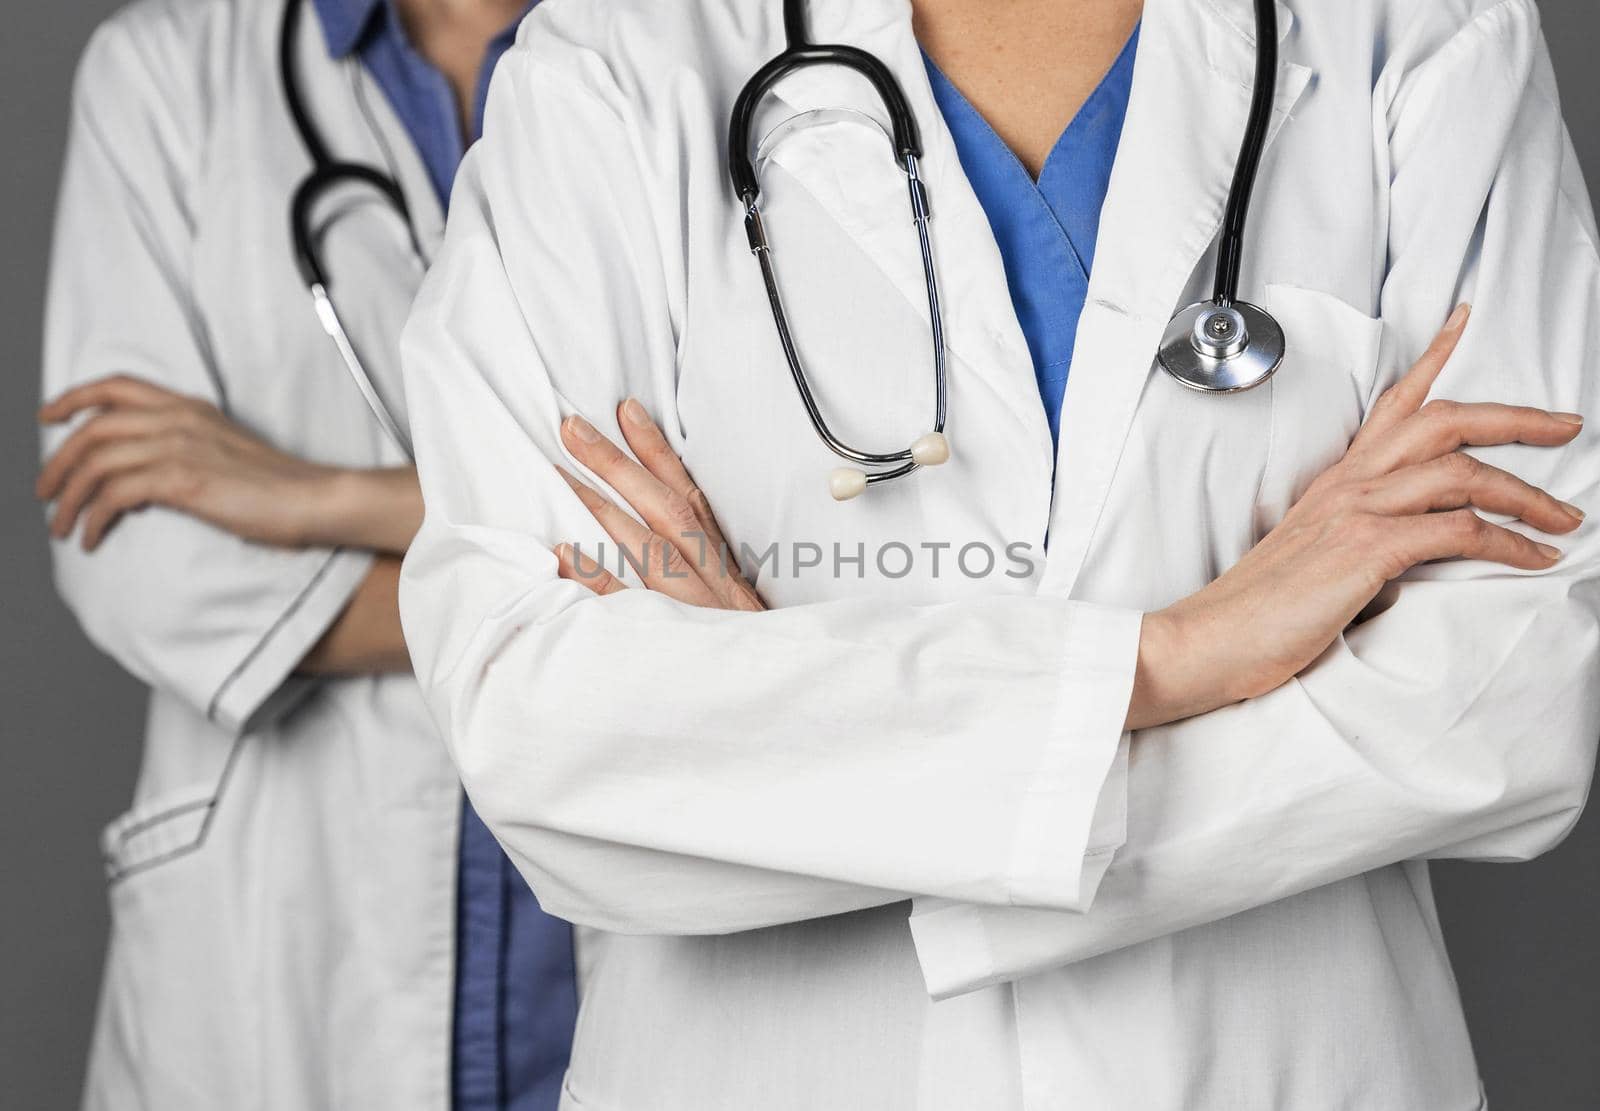 females doctor hospital with stethoscope. High quality beautiful photo concept by Zahard